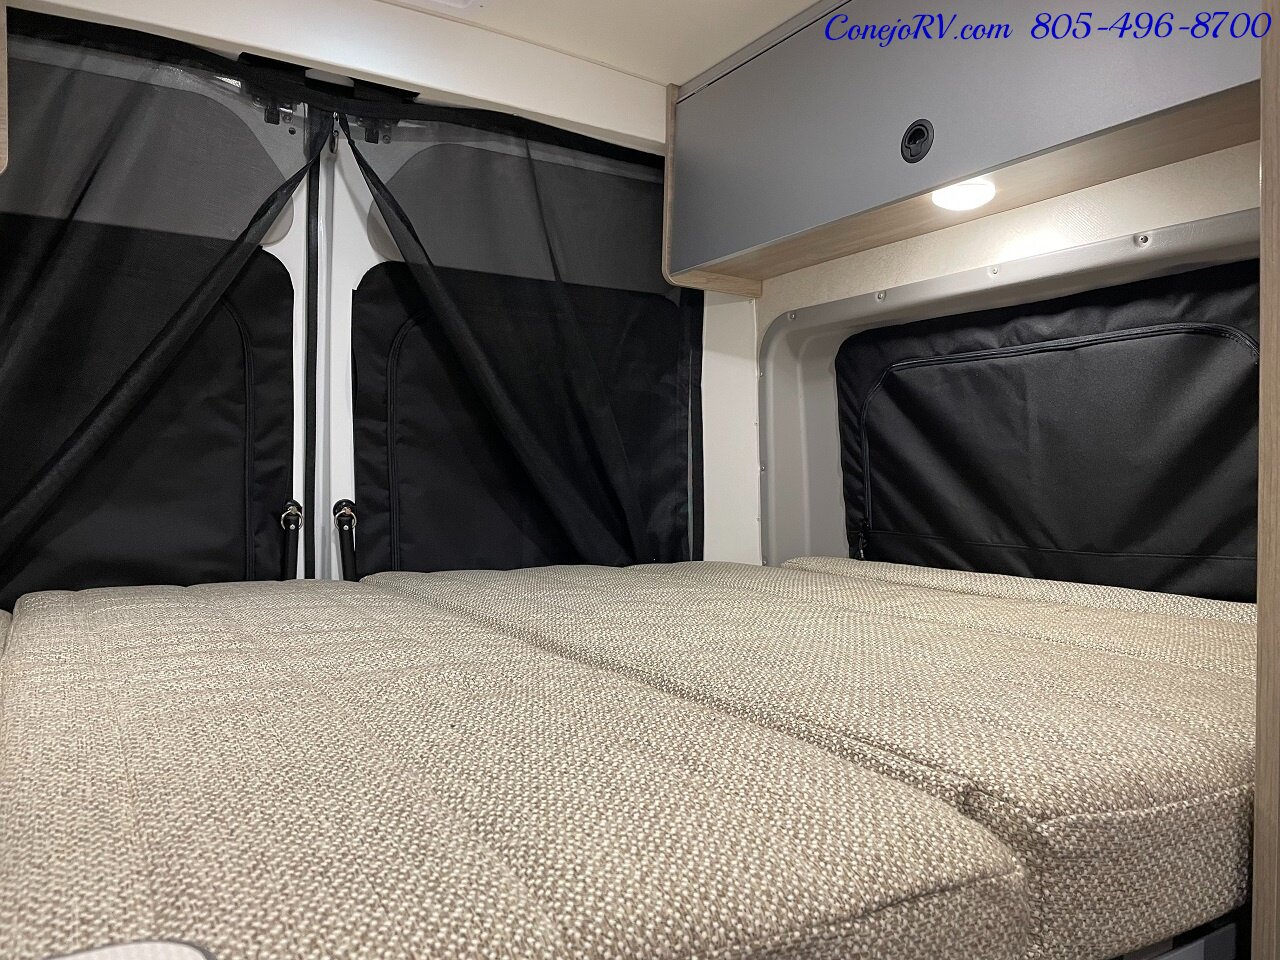 2023 WINNEBAGO Solis 59P Murphy Bed Pop Top Full Galley New Chassis  Adaptive Cruise - Photo 22 - Thousand Oaks, CA 91360